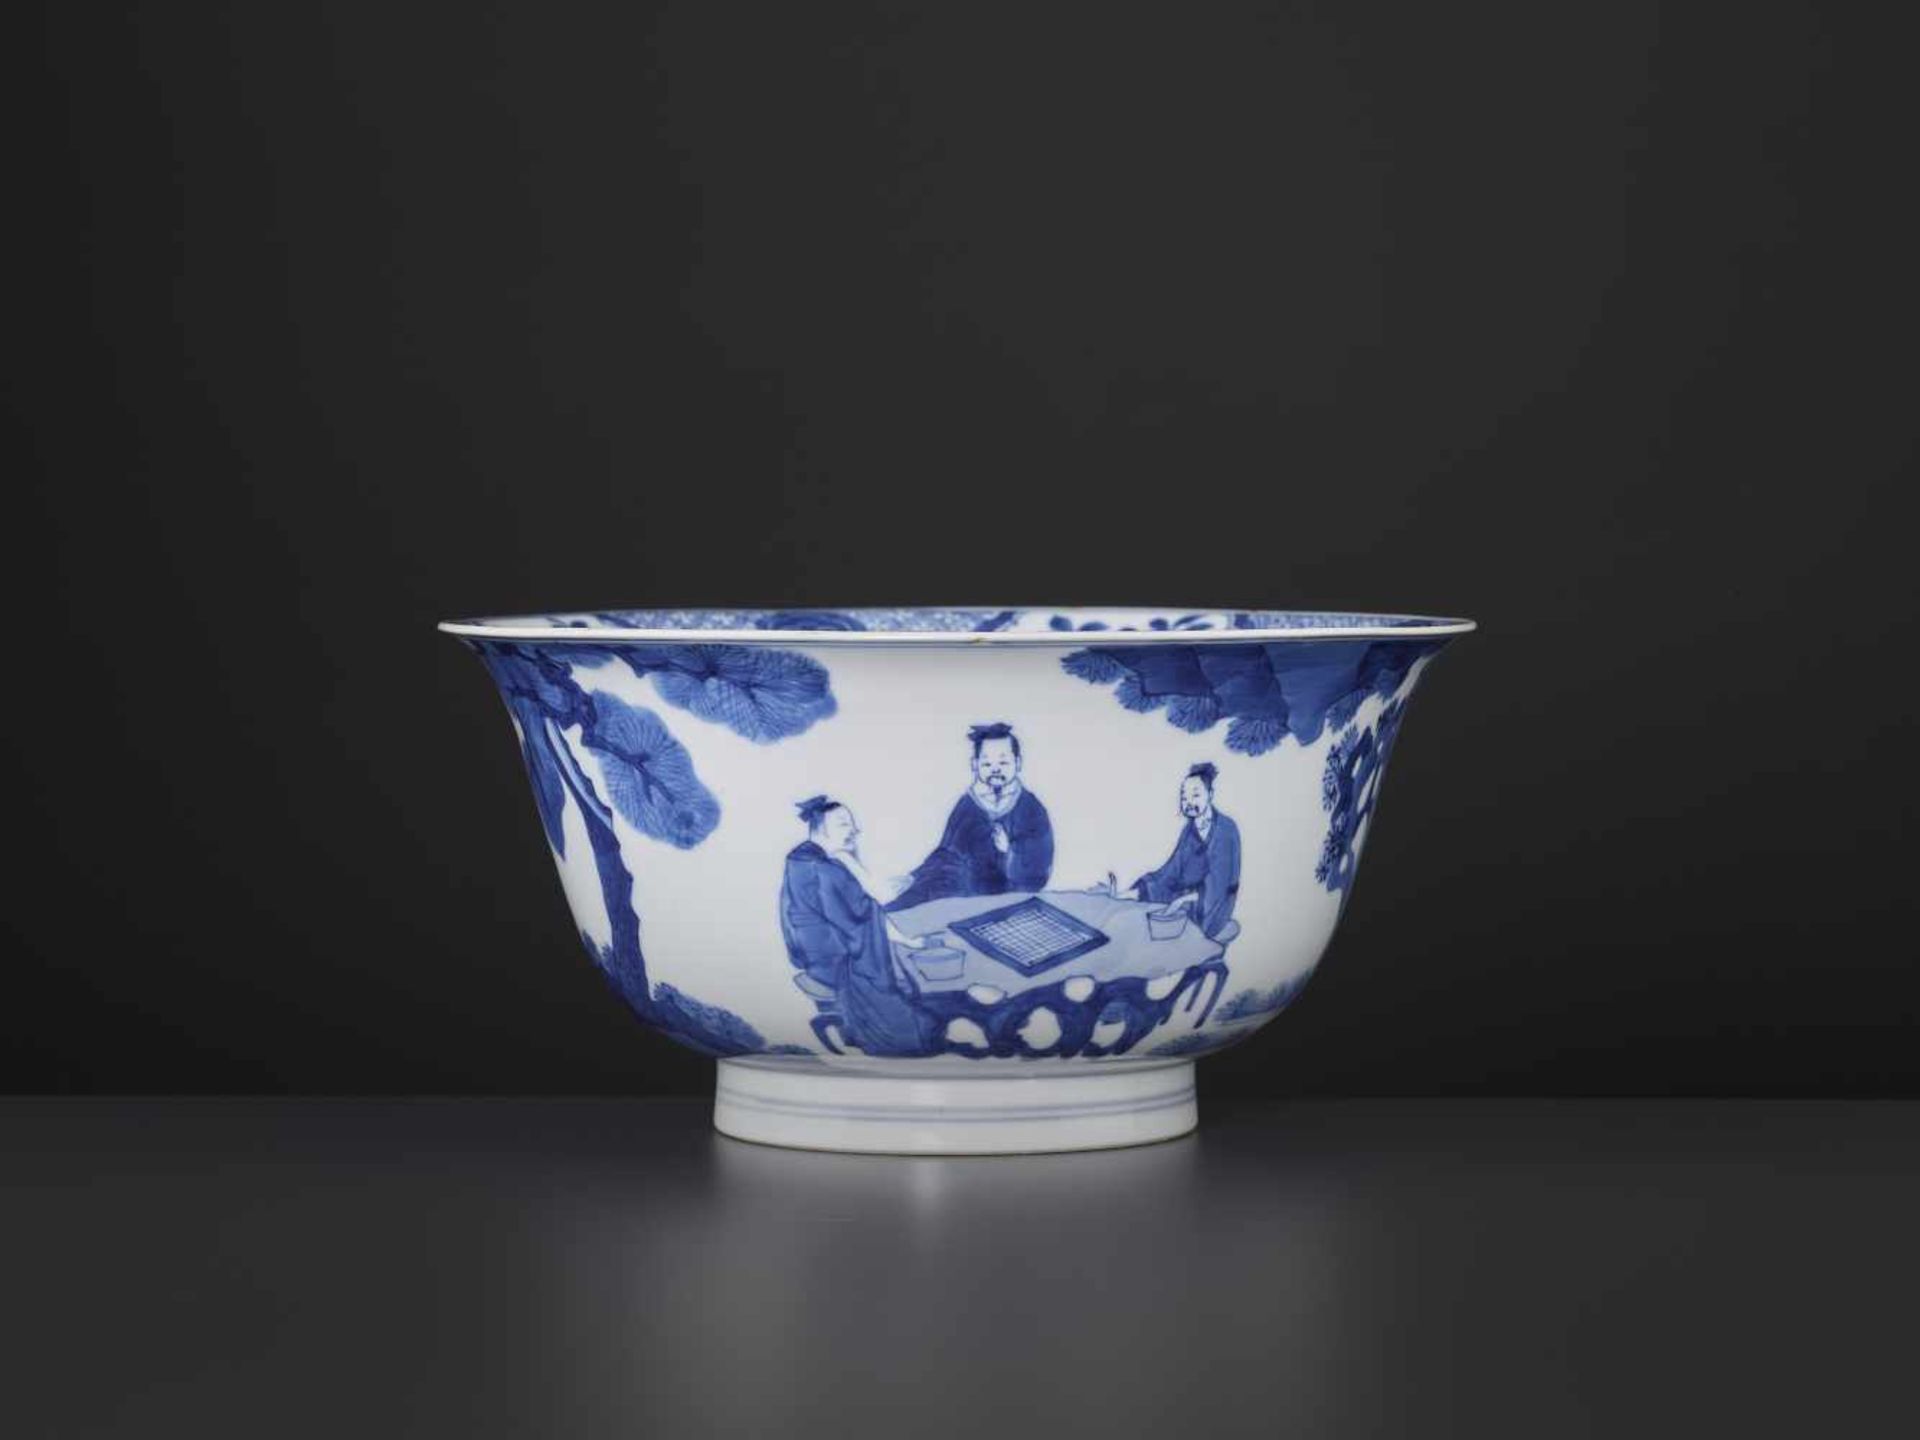 A KANGXI PERIOD WEIQI PLAYER BOWLChina, 1662-1722. Skillfully painted in striking cobalt-blue with